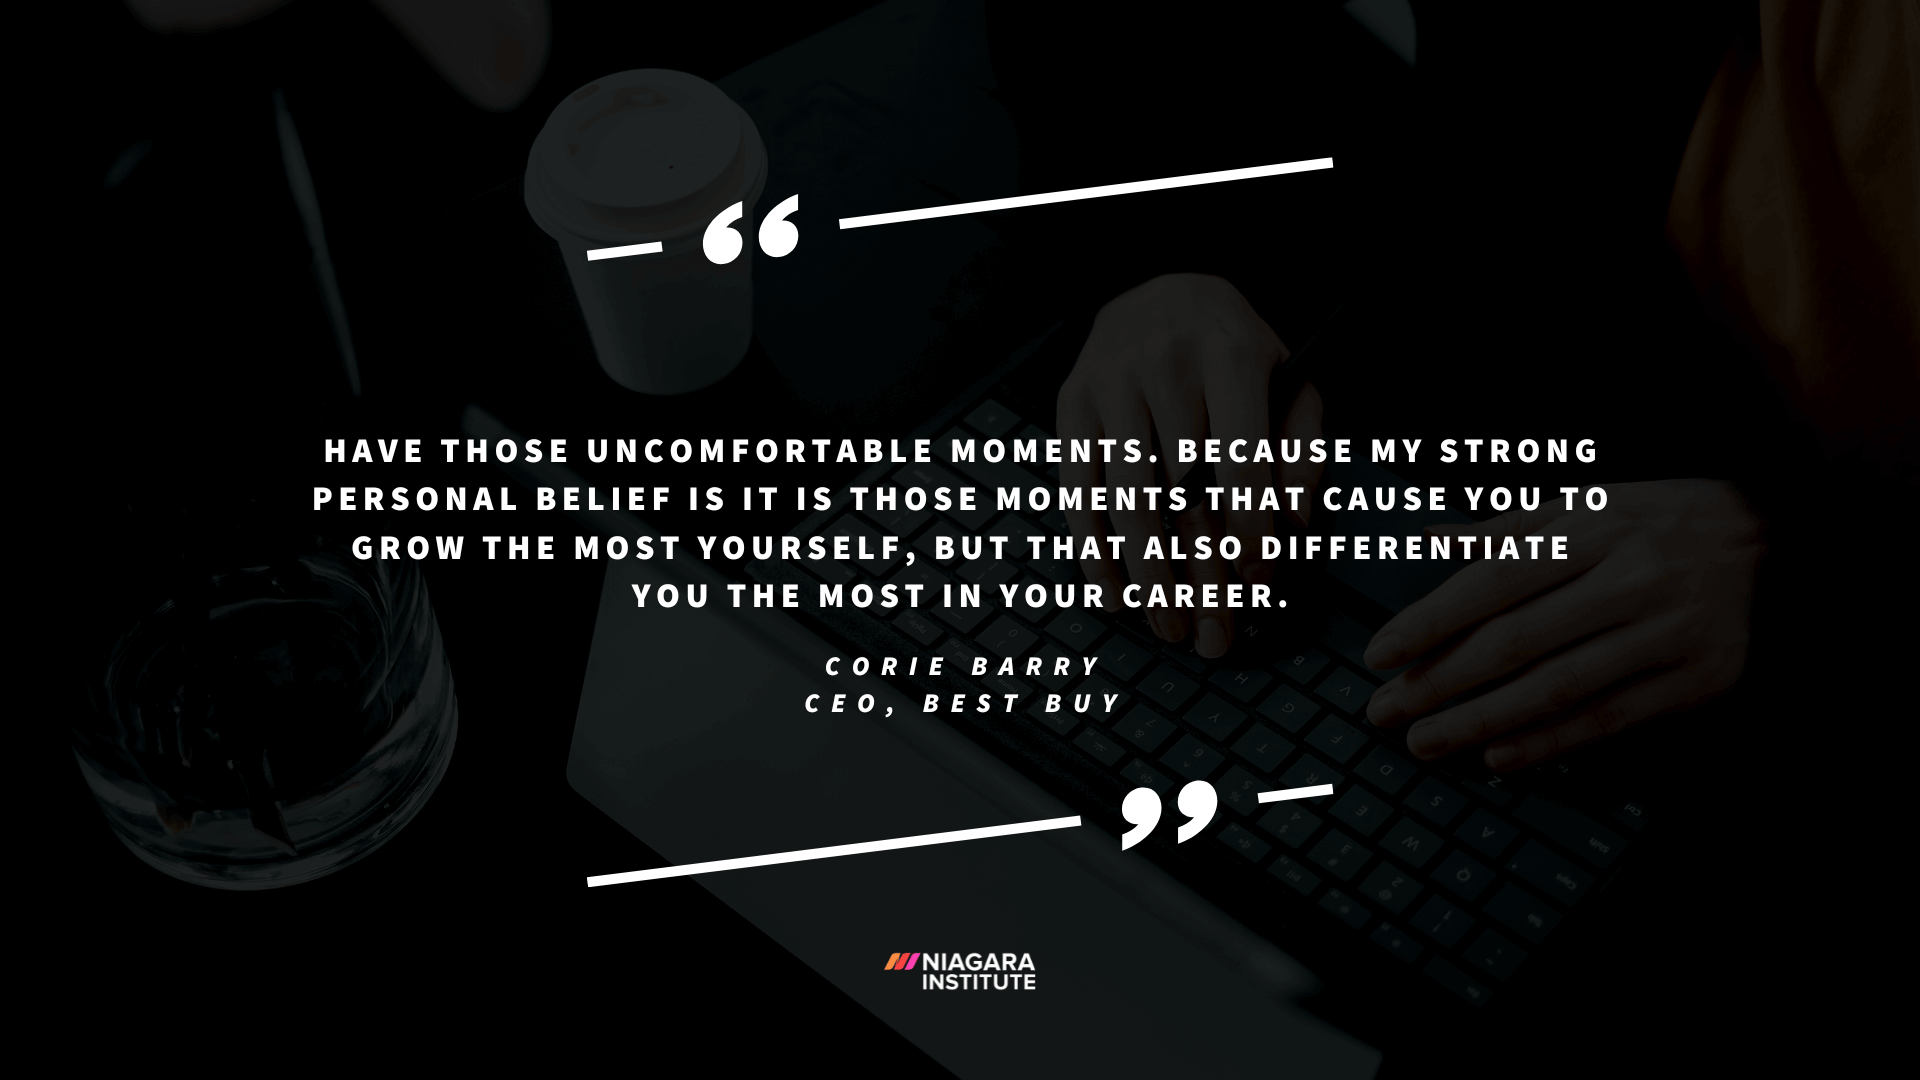 Motivating Career Advice Quote on Embracing Uncomfortable Moments - Corie Barry, CEO, Best Buy (3) (1)